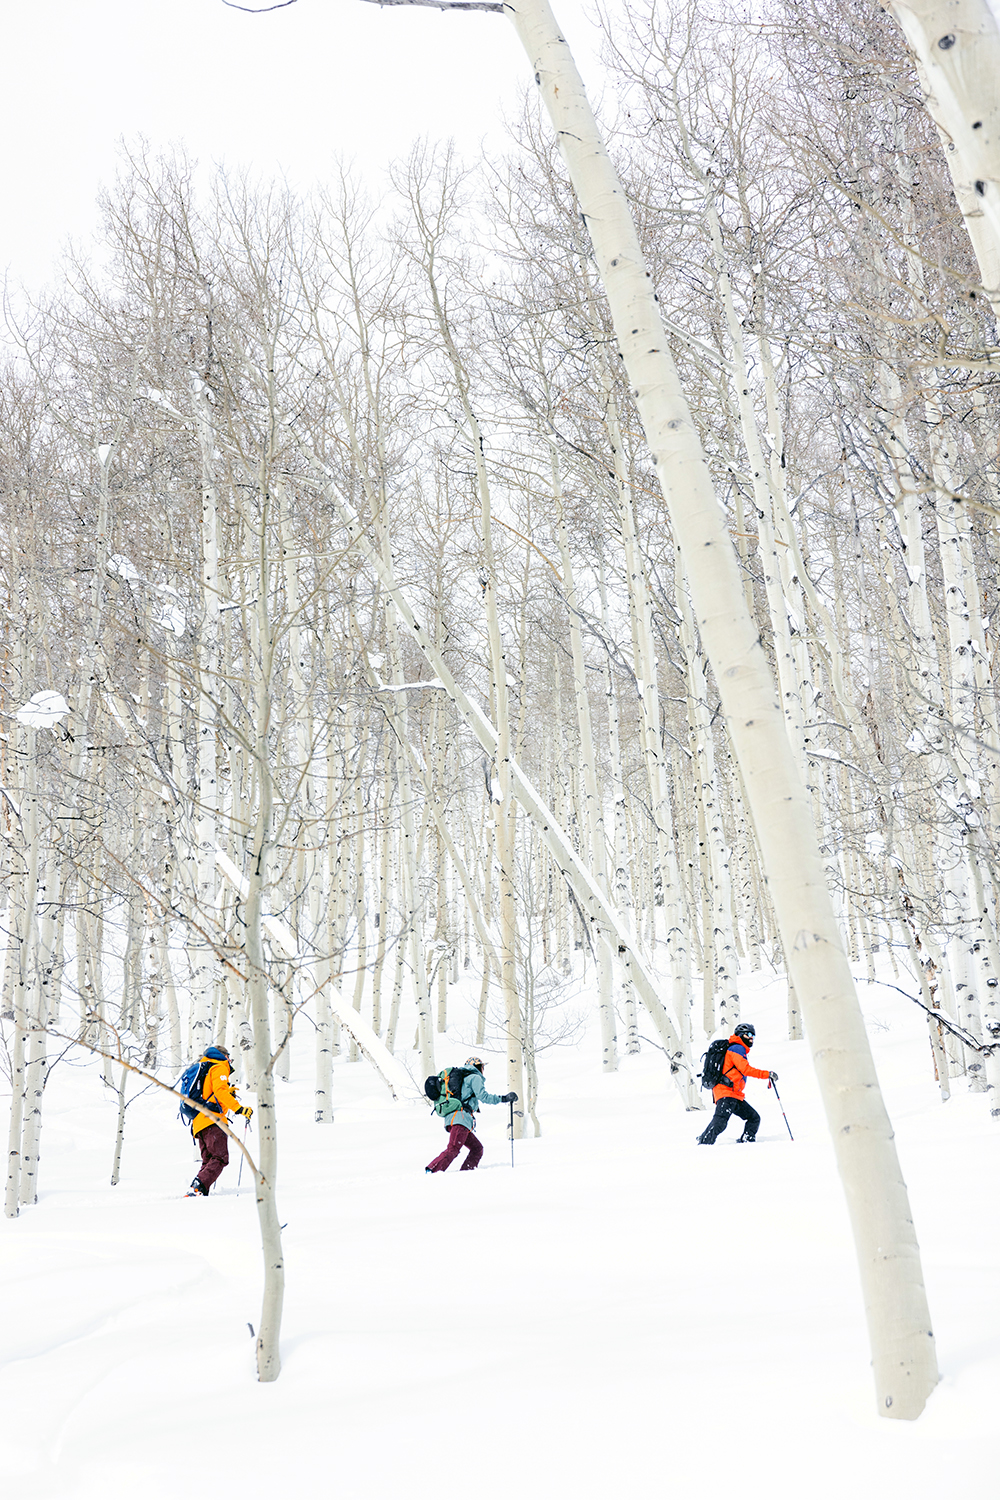 Three backcountry skiers skin through aspen trees in Crested Butte, Colorado.